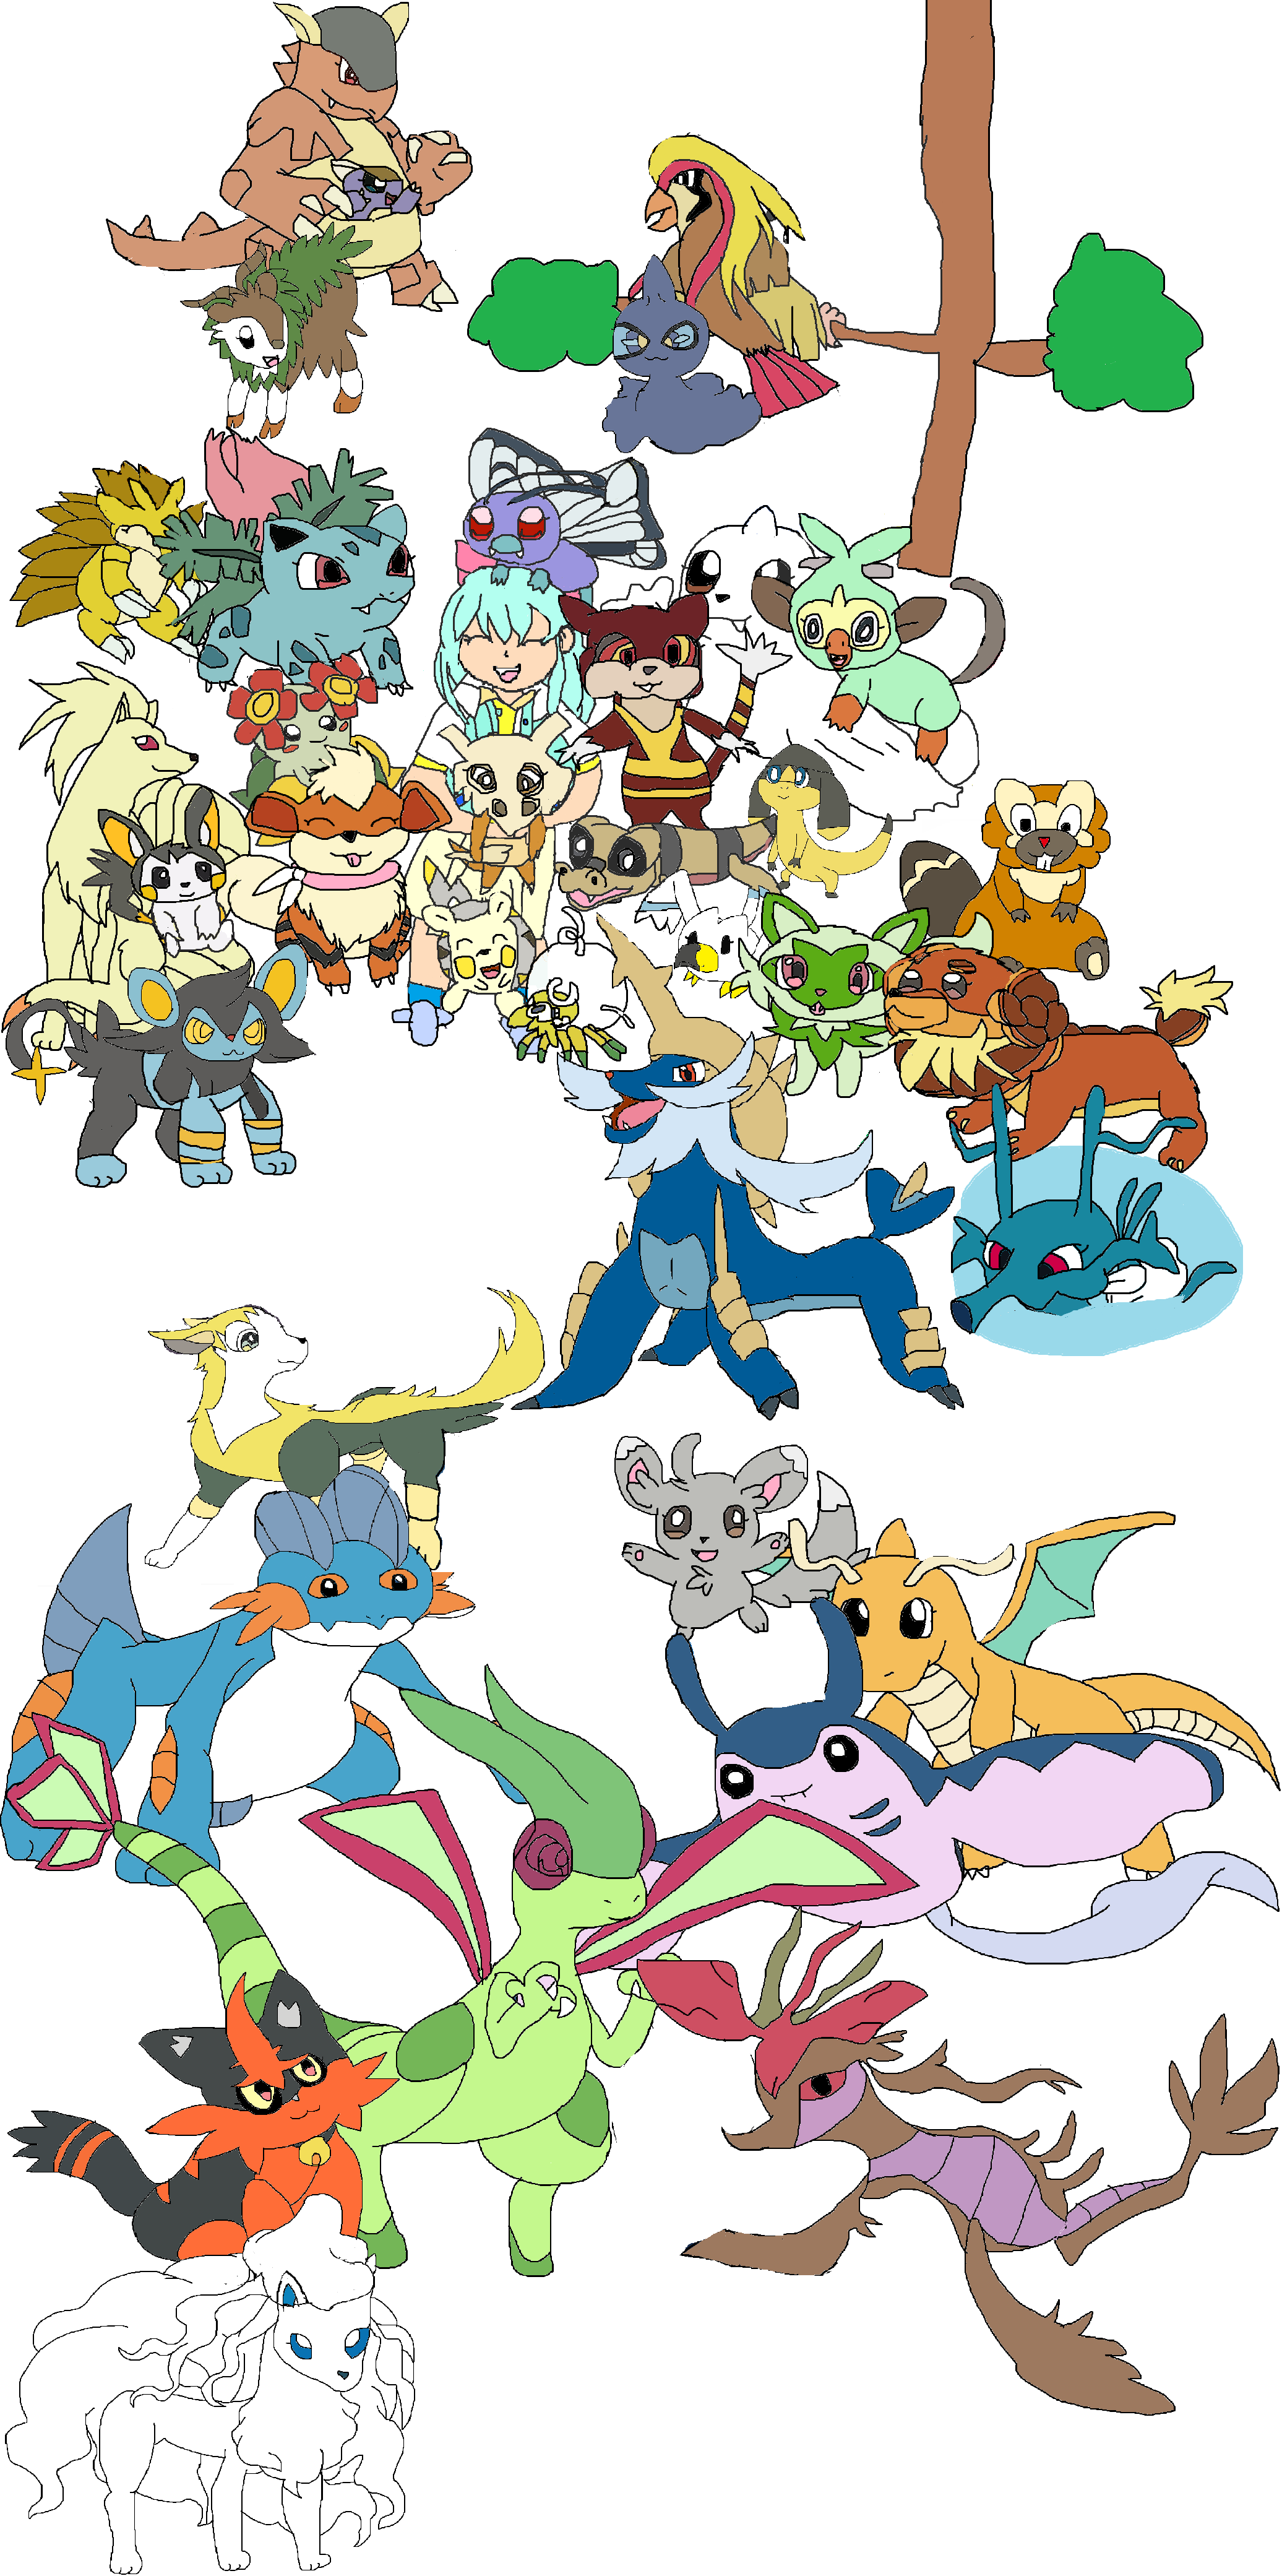 all of heart's pokemon 8.0.png